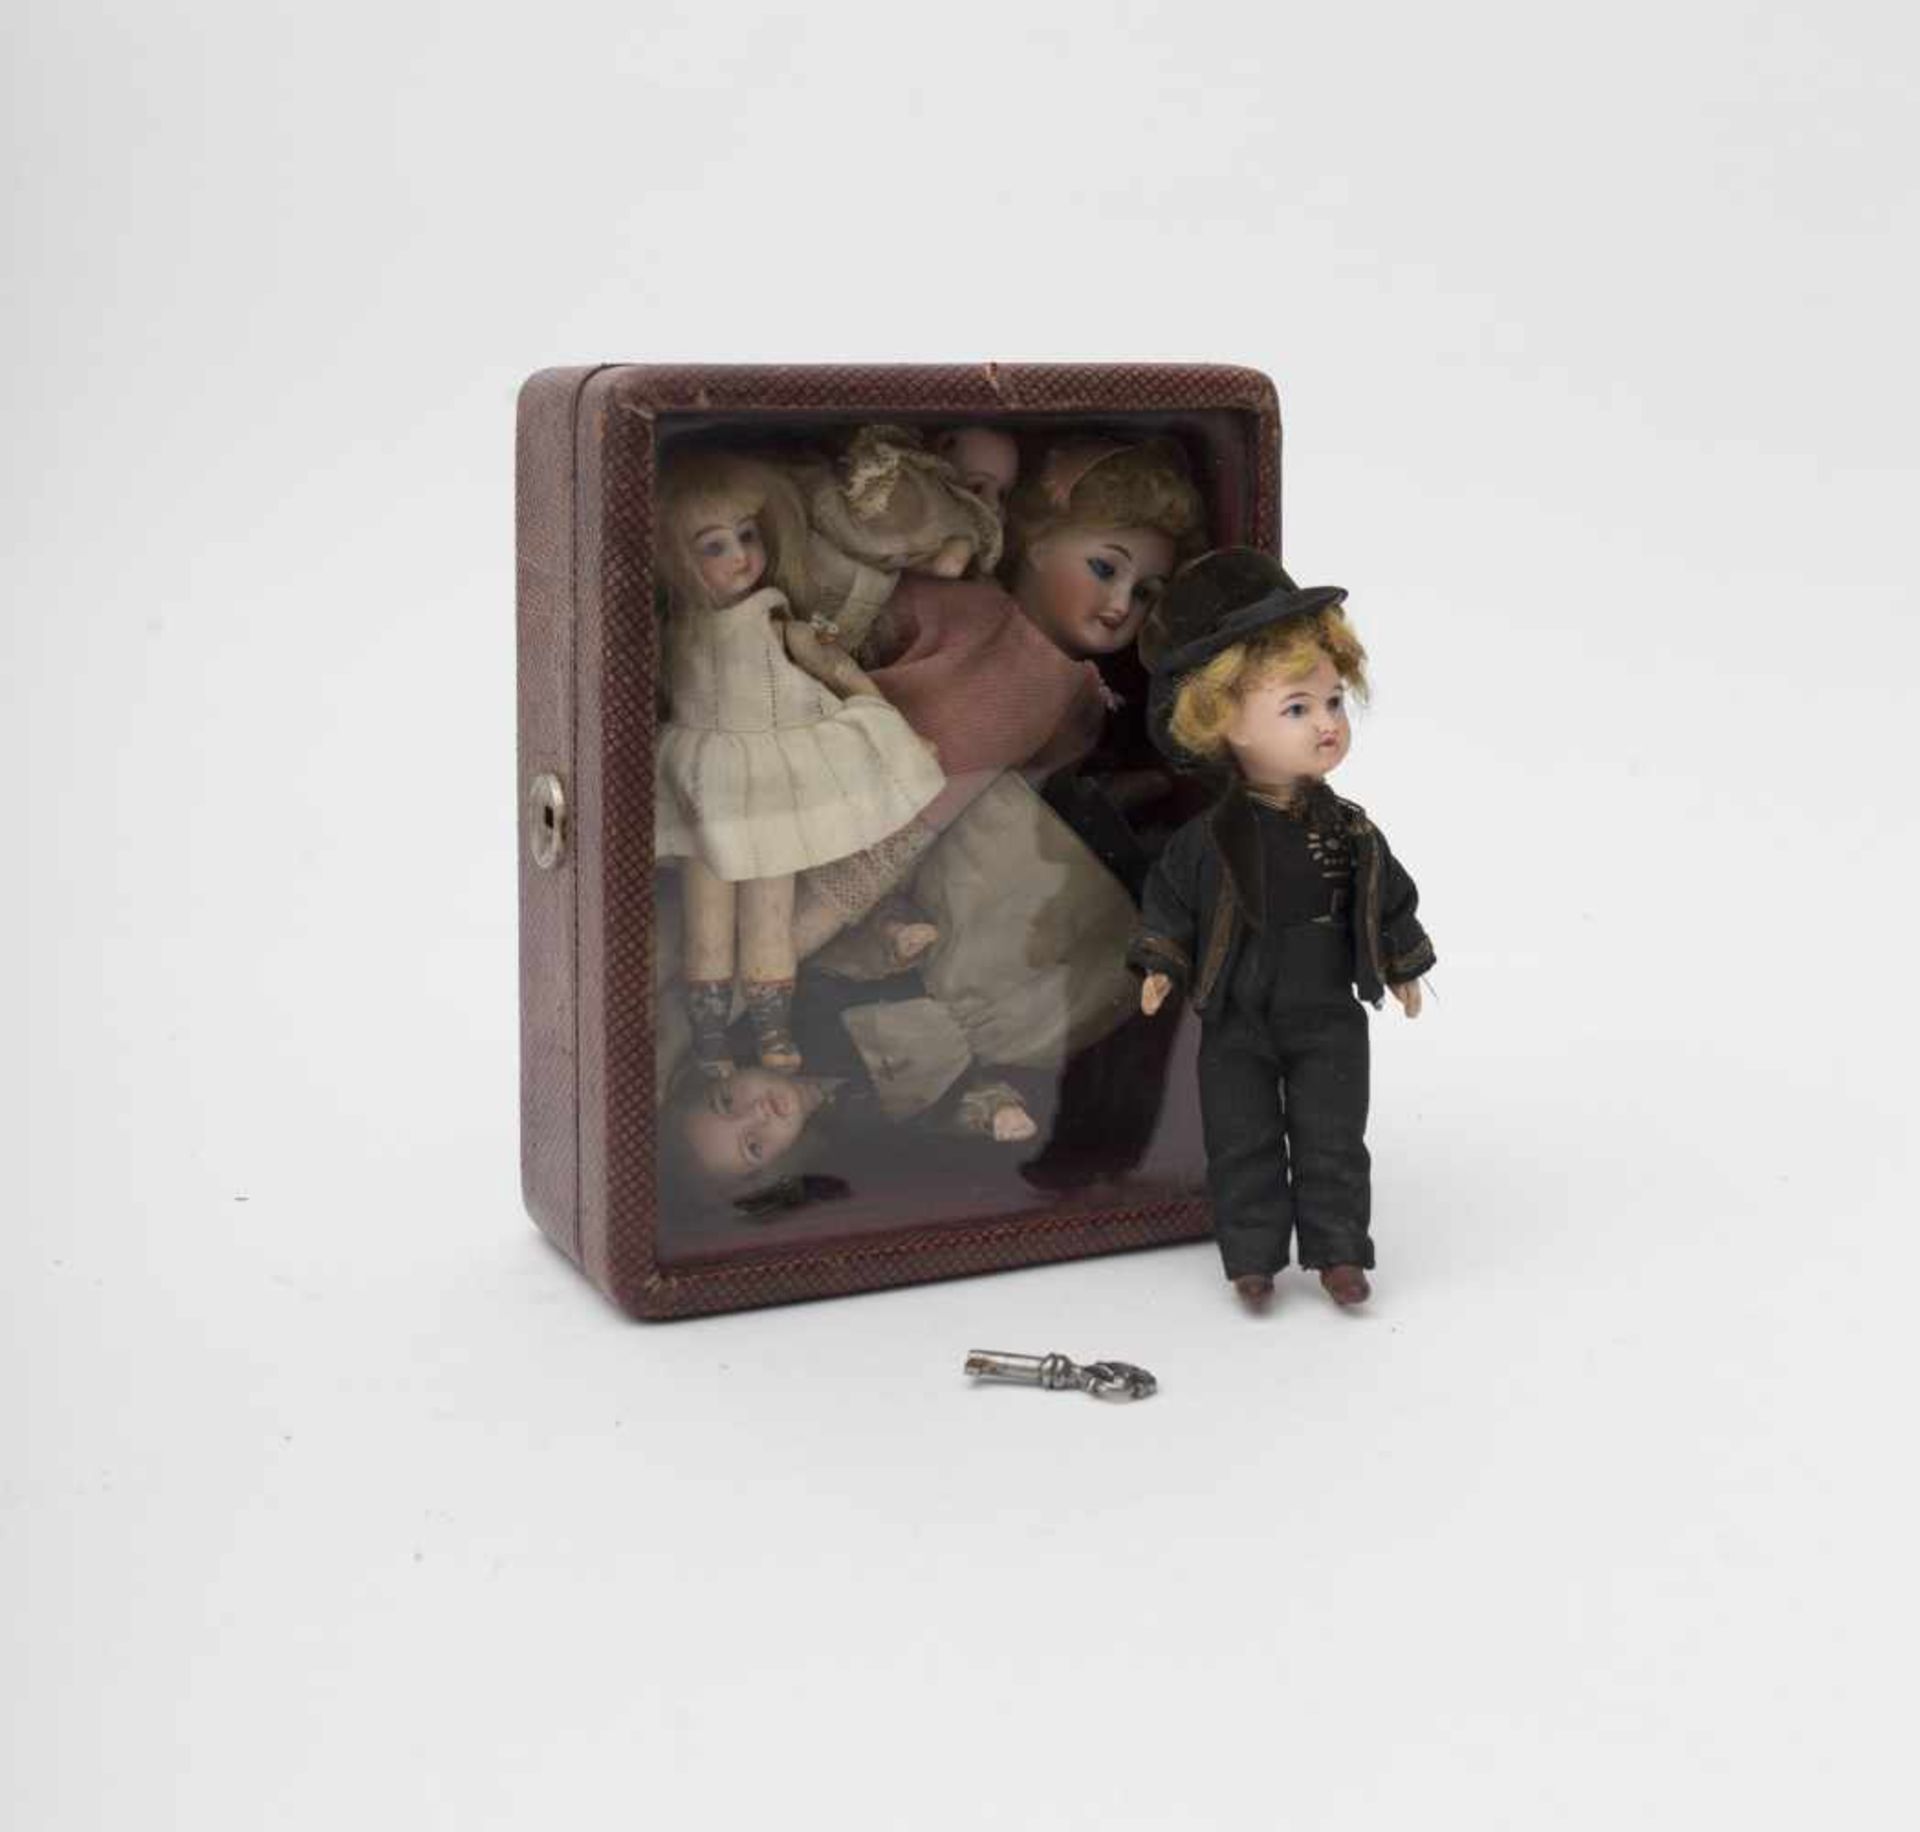 Five mignonettes Including a couple of UNIS France folkloric dolls, in a captioned box with glass